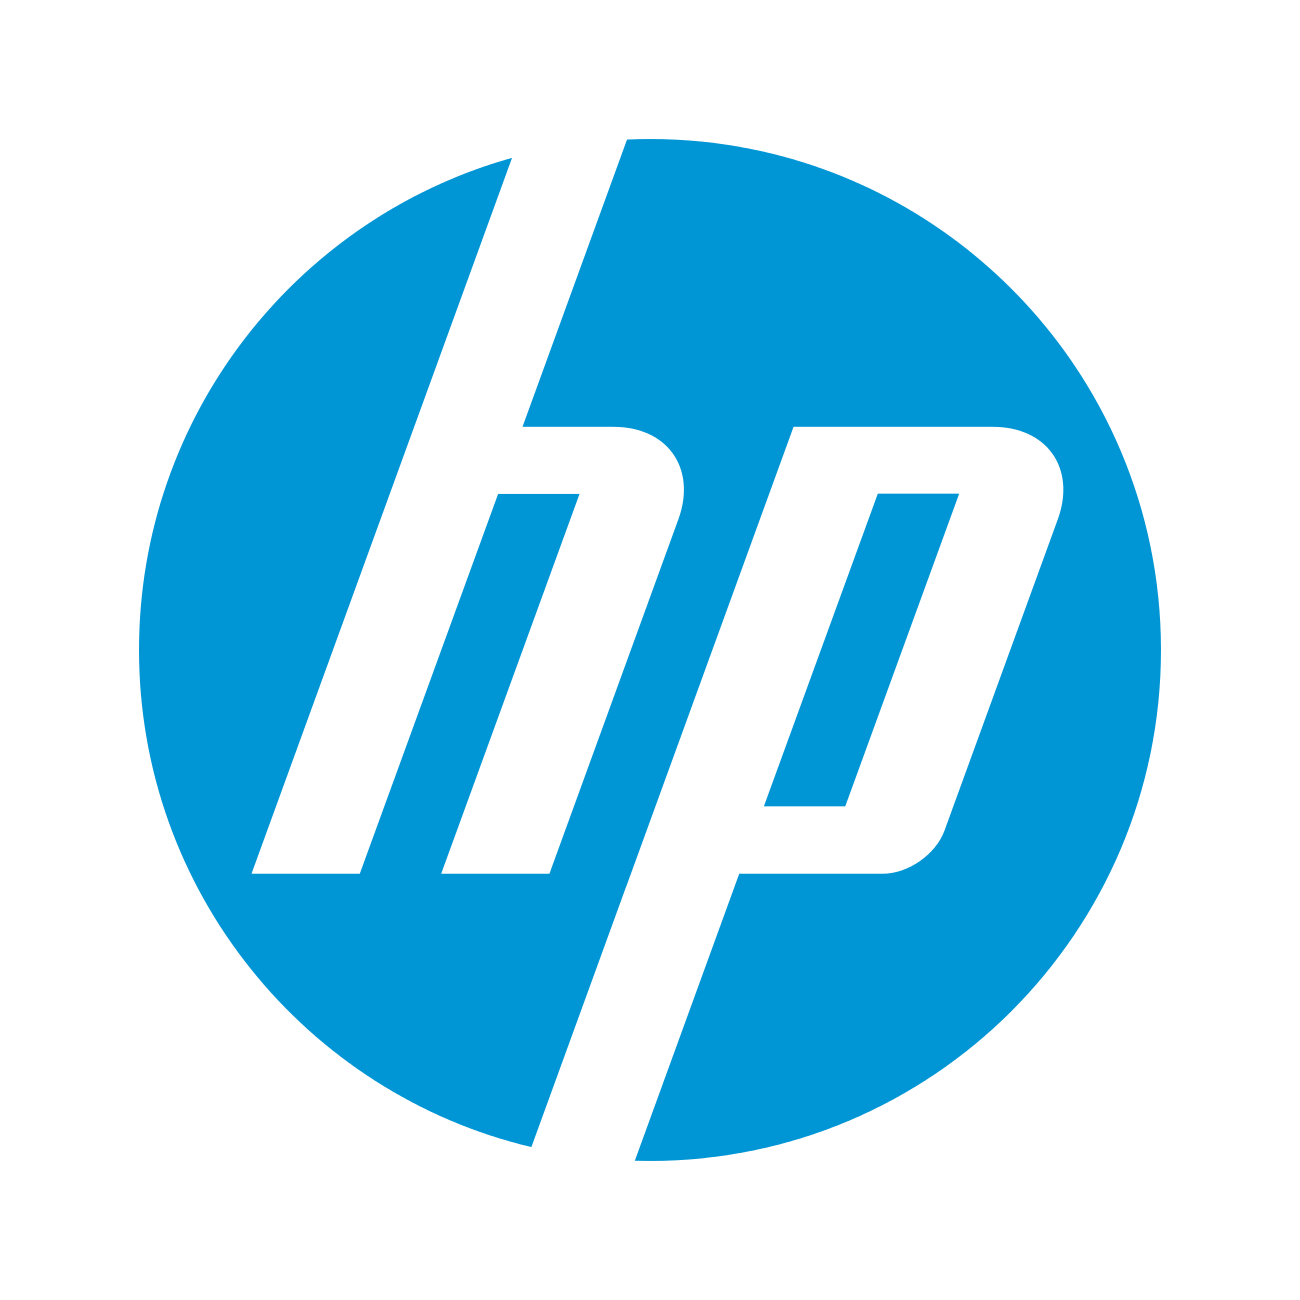 HP Care Pack Solution Support - 5 Year - Warranty